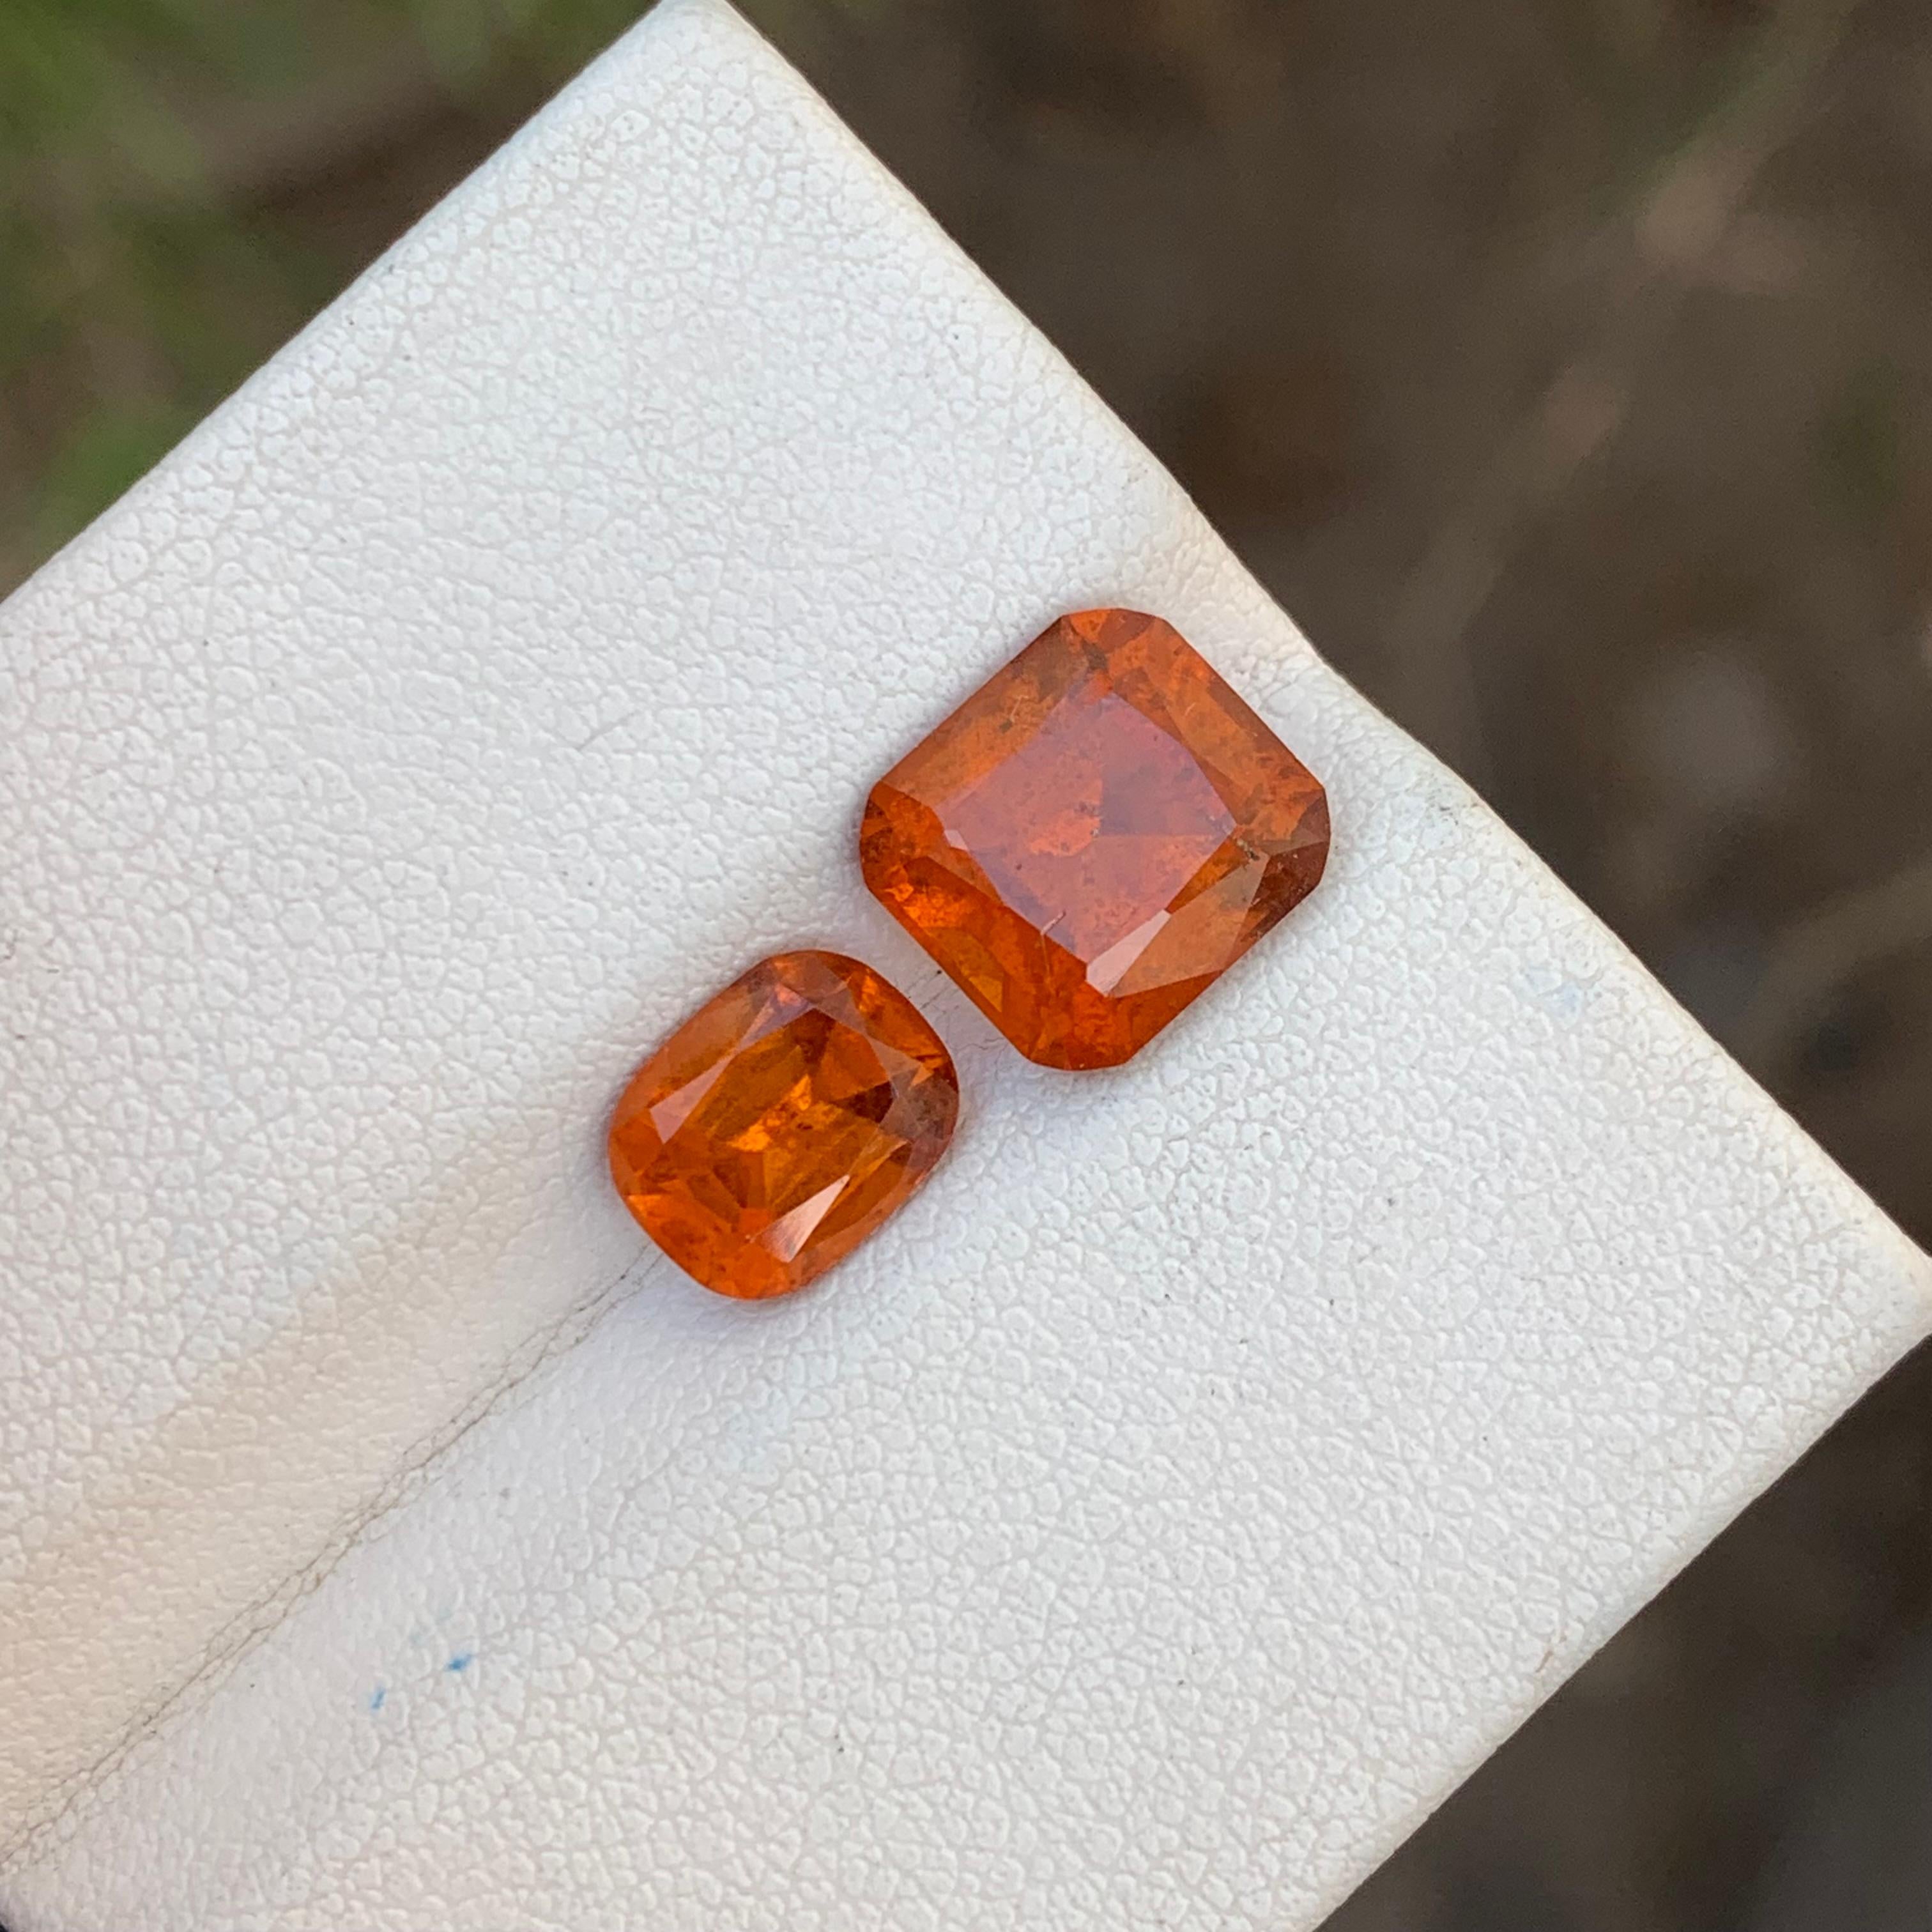 5.95 Carats Natural Loose Hessonite Garnet 2 Pieces For Ring Jewelry Making  en vente 13